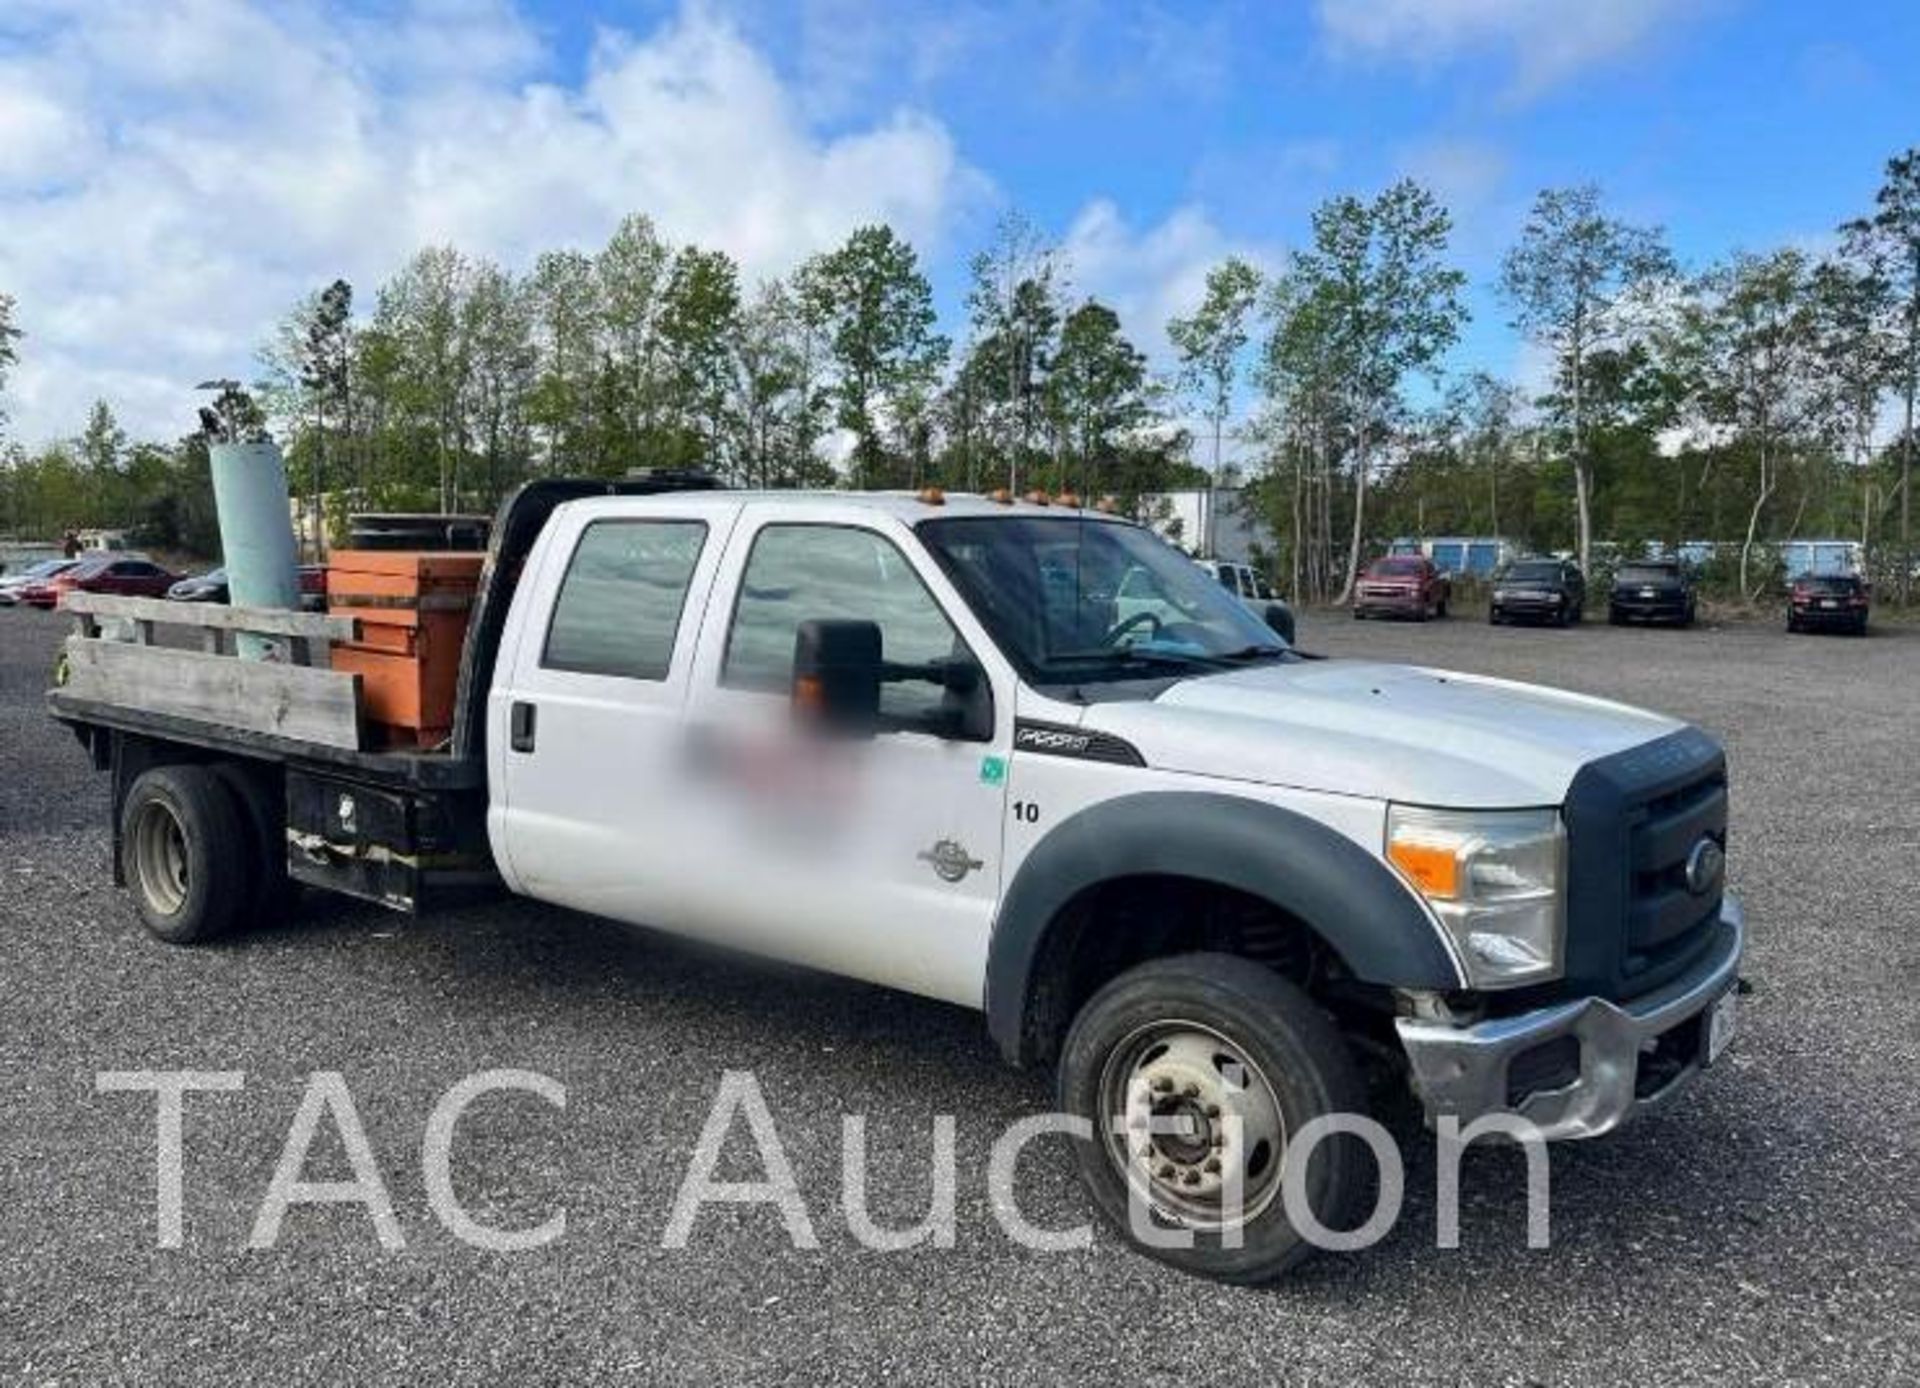 2012 Ford F550 4x4 Crew Cab Flatbed Truck - Image 4 of 28